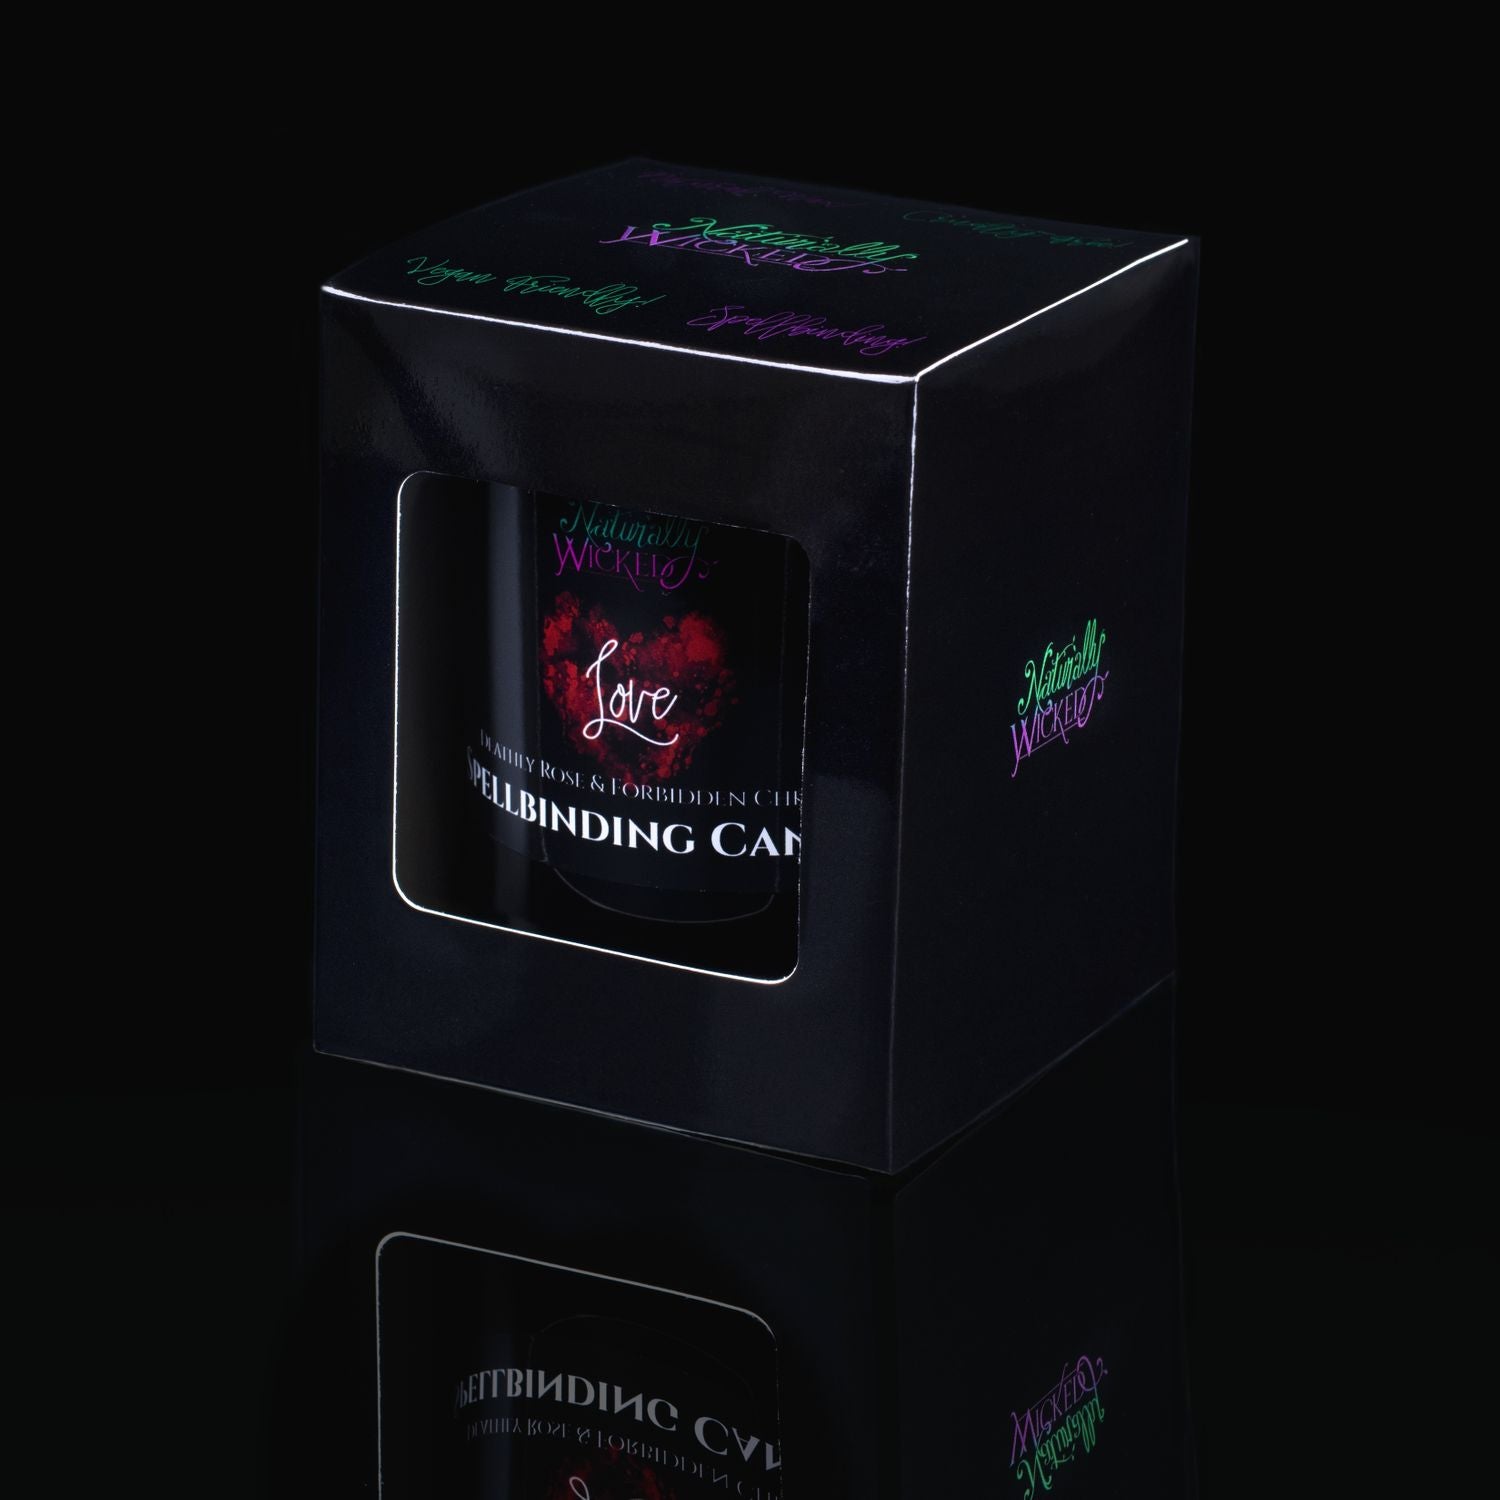 The Perfect Spell Candle For The One You Love. Naturally Wicked Spellbinding Love Candle Displayed In A Sleek Black Gloss Gift Box. The Candle Features Plant-Based Smooth Pink Wax, A Wood Wick And A Beautiful Rose Quartz Crystal.